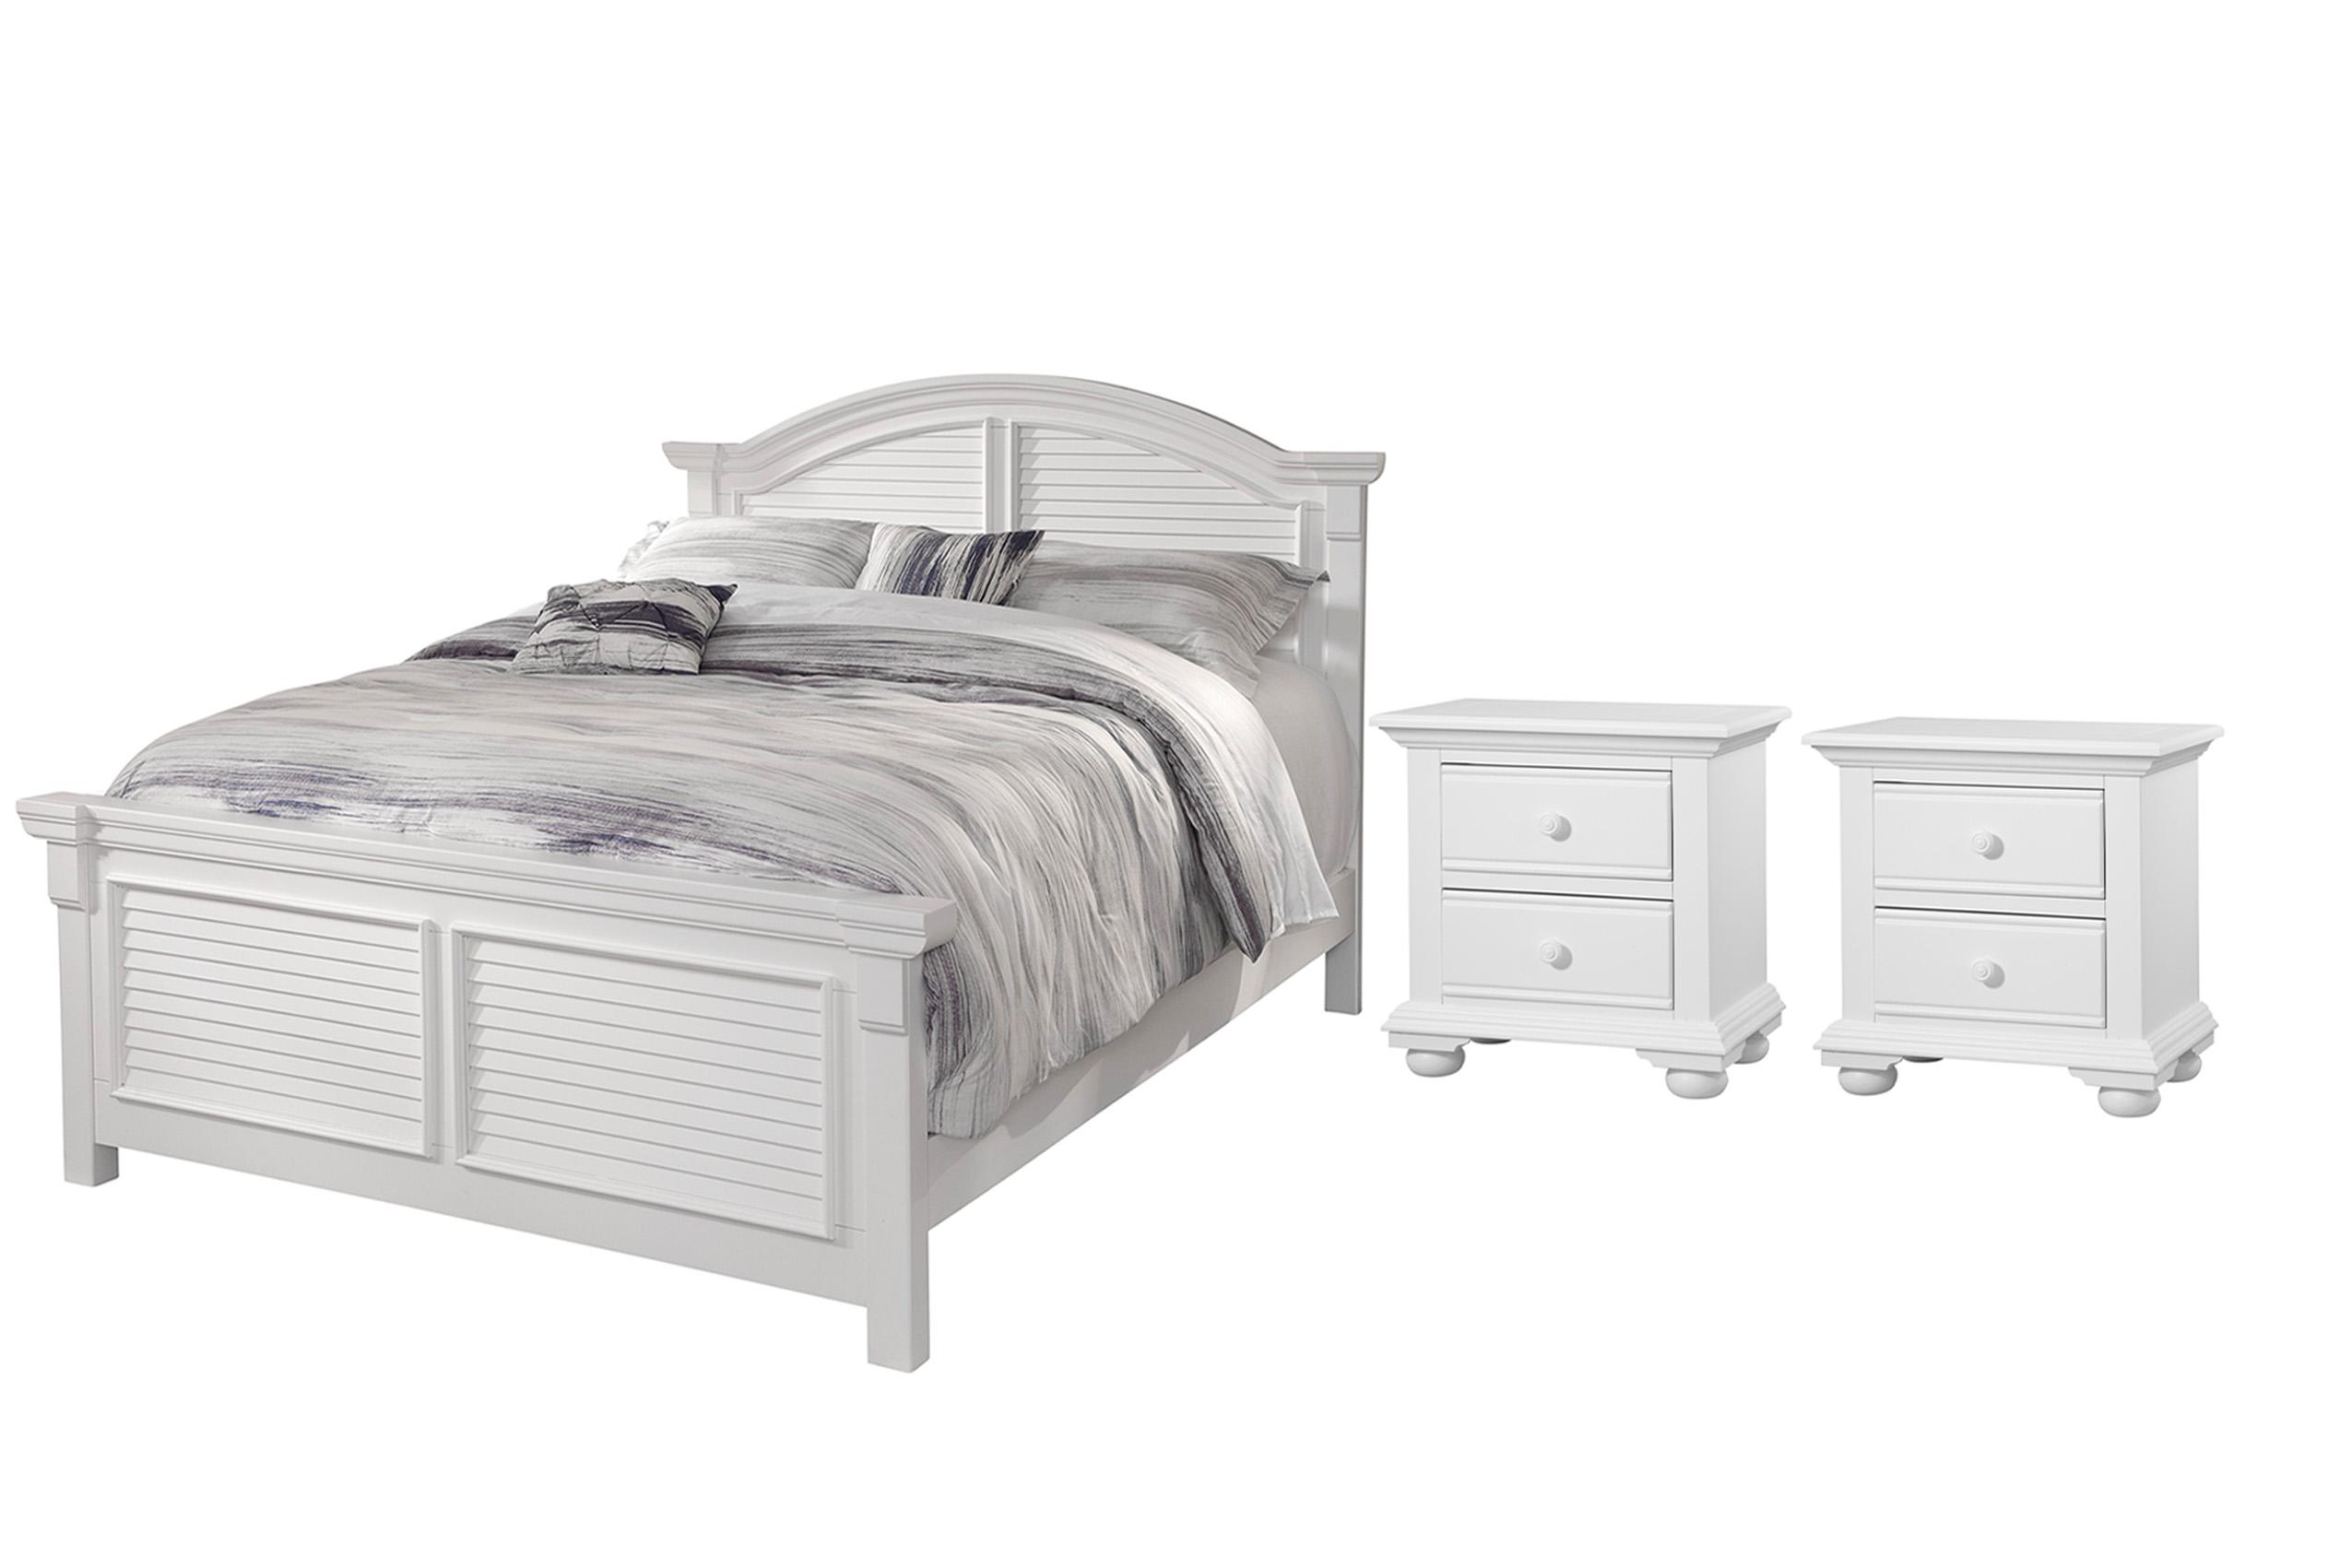 Classic, Traditional, Cottage Panel Bedroom Set COTTAGE 6510-50PAN 6510-50PAN-2N-3PC in White 